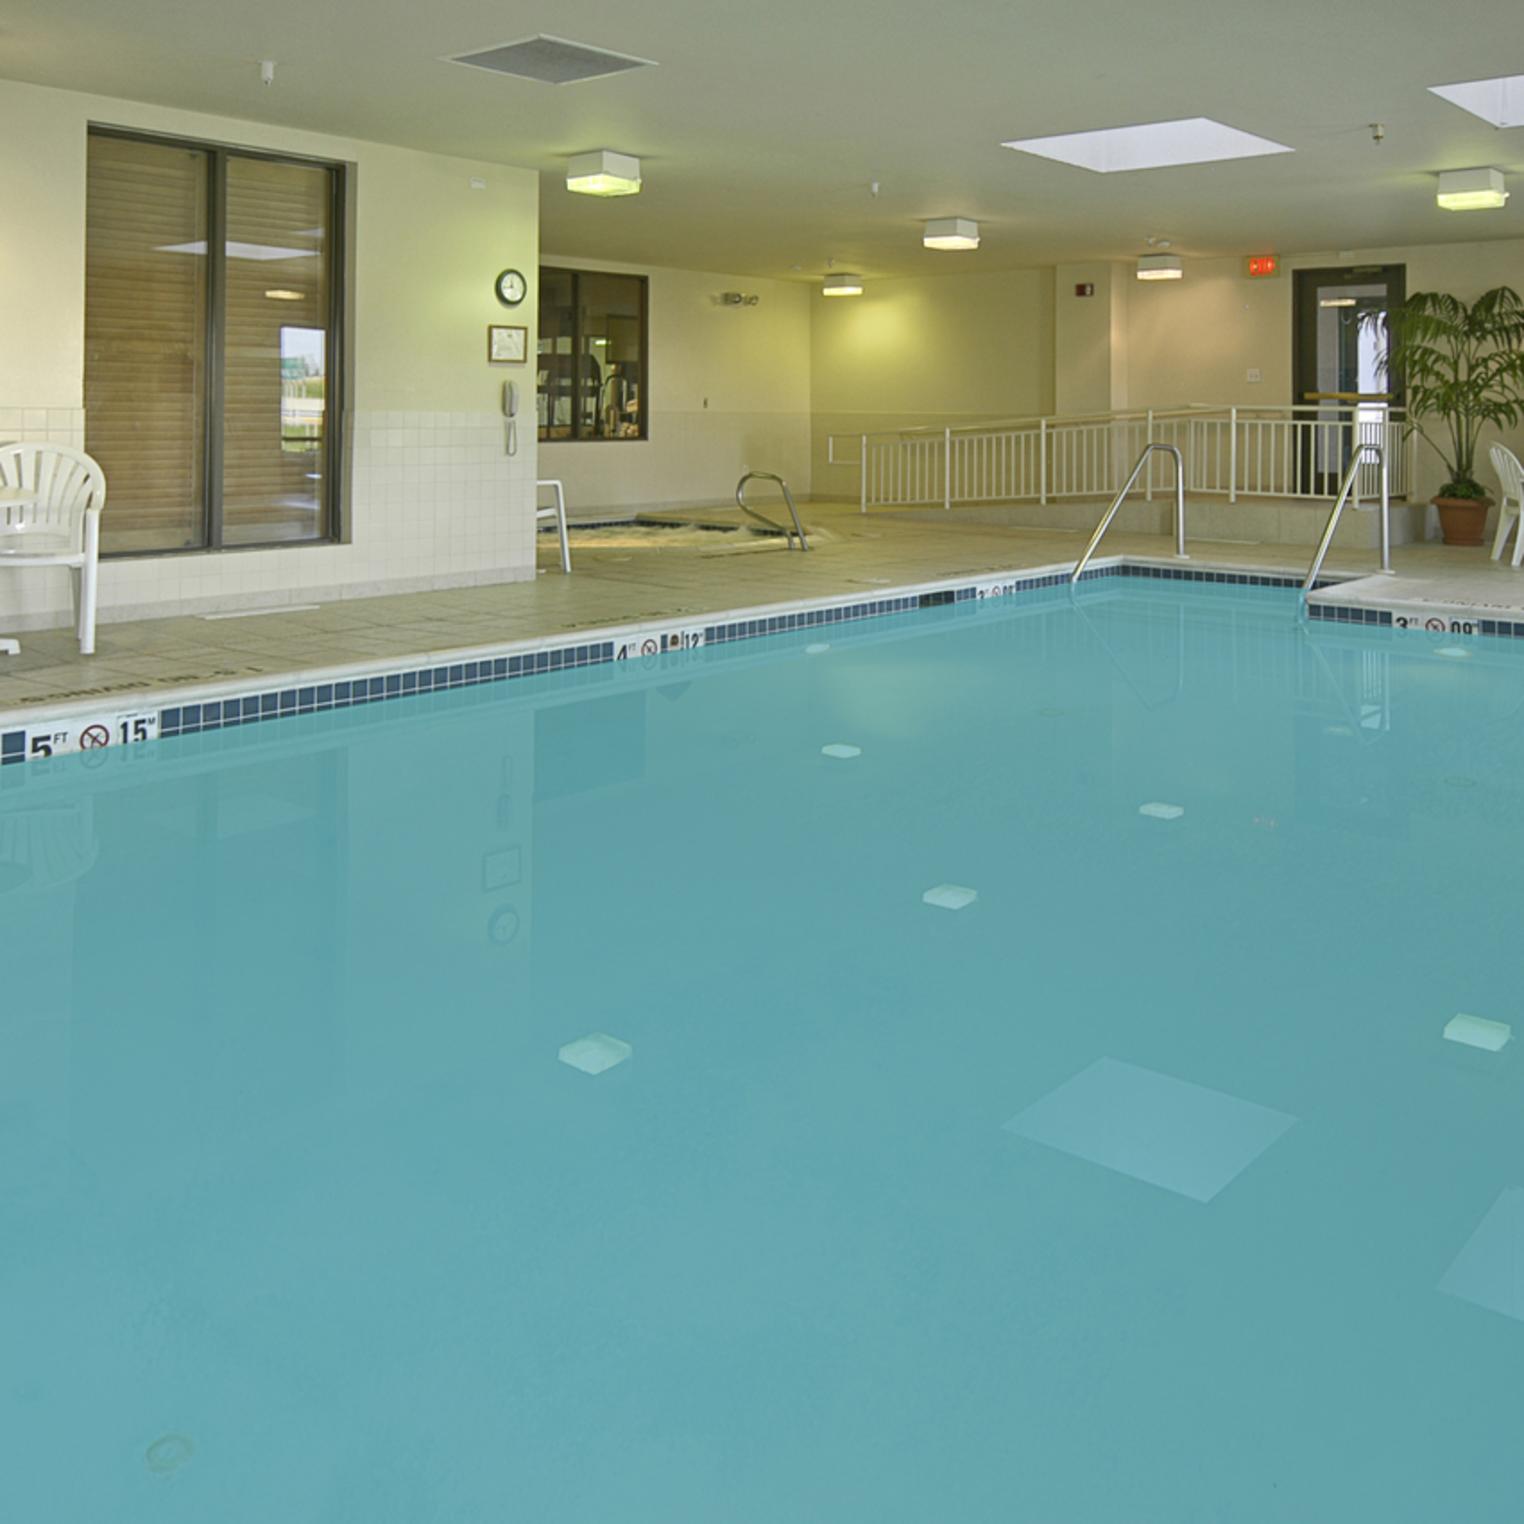 Relax and enjoy our heated indoor pool.